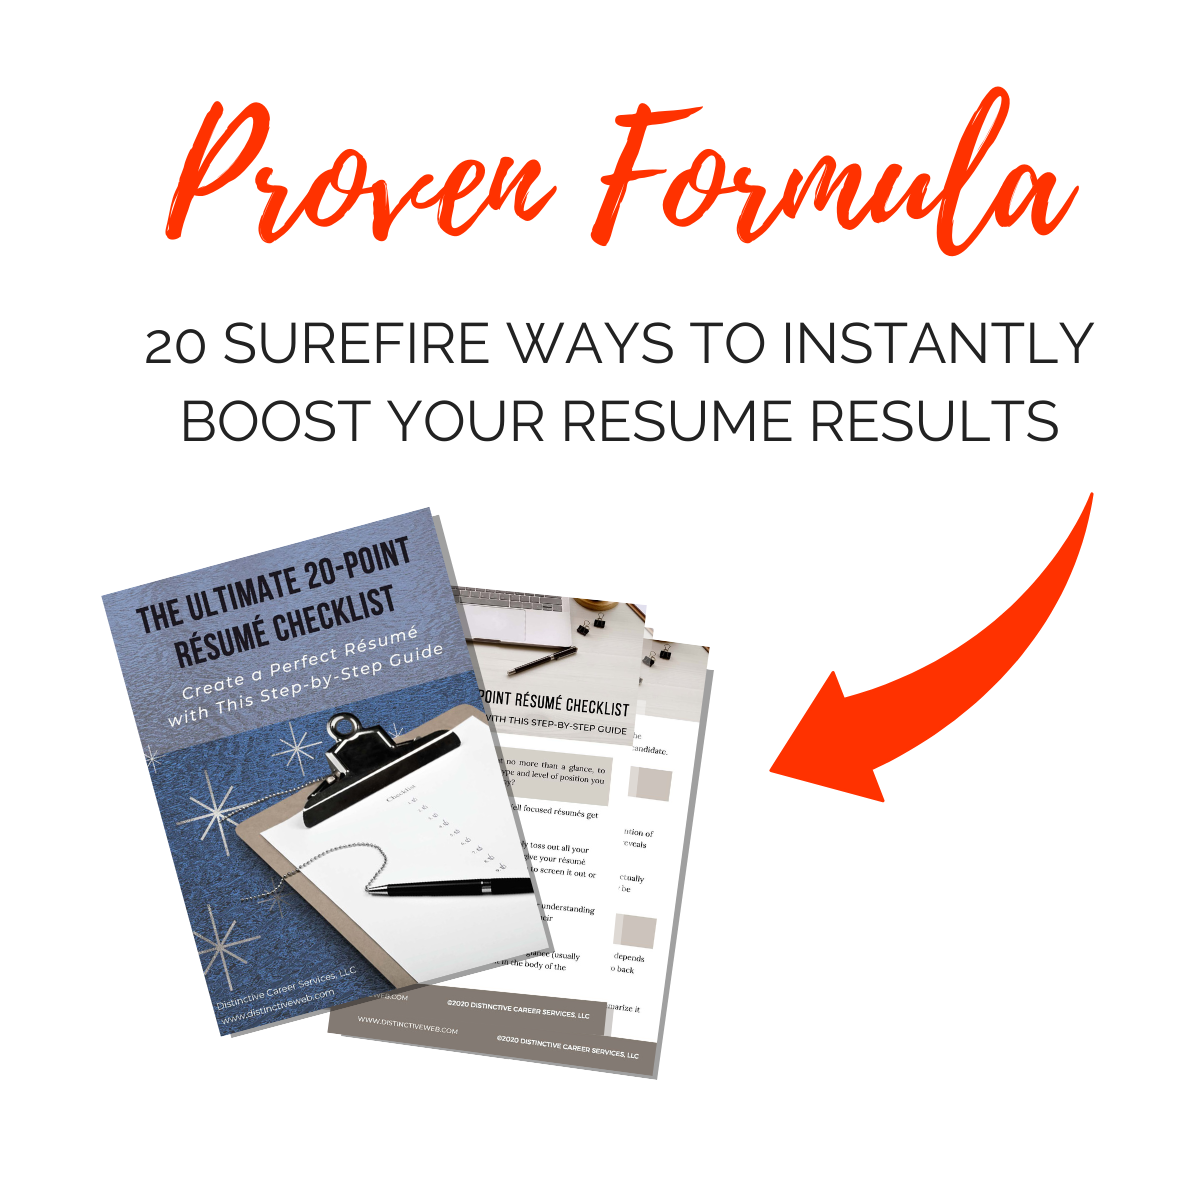 20 Surefire Ways to Instantly Boost Your Resume Results